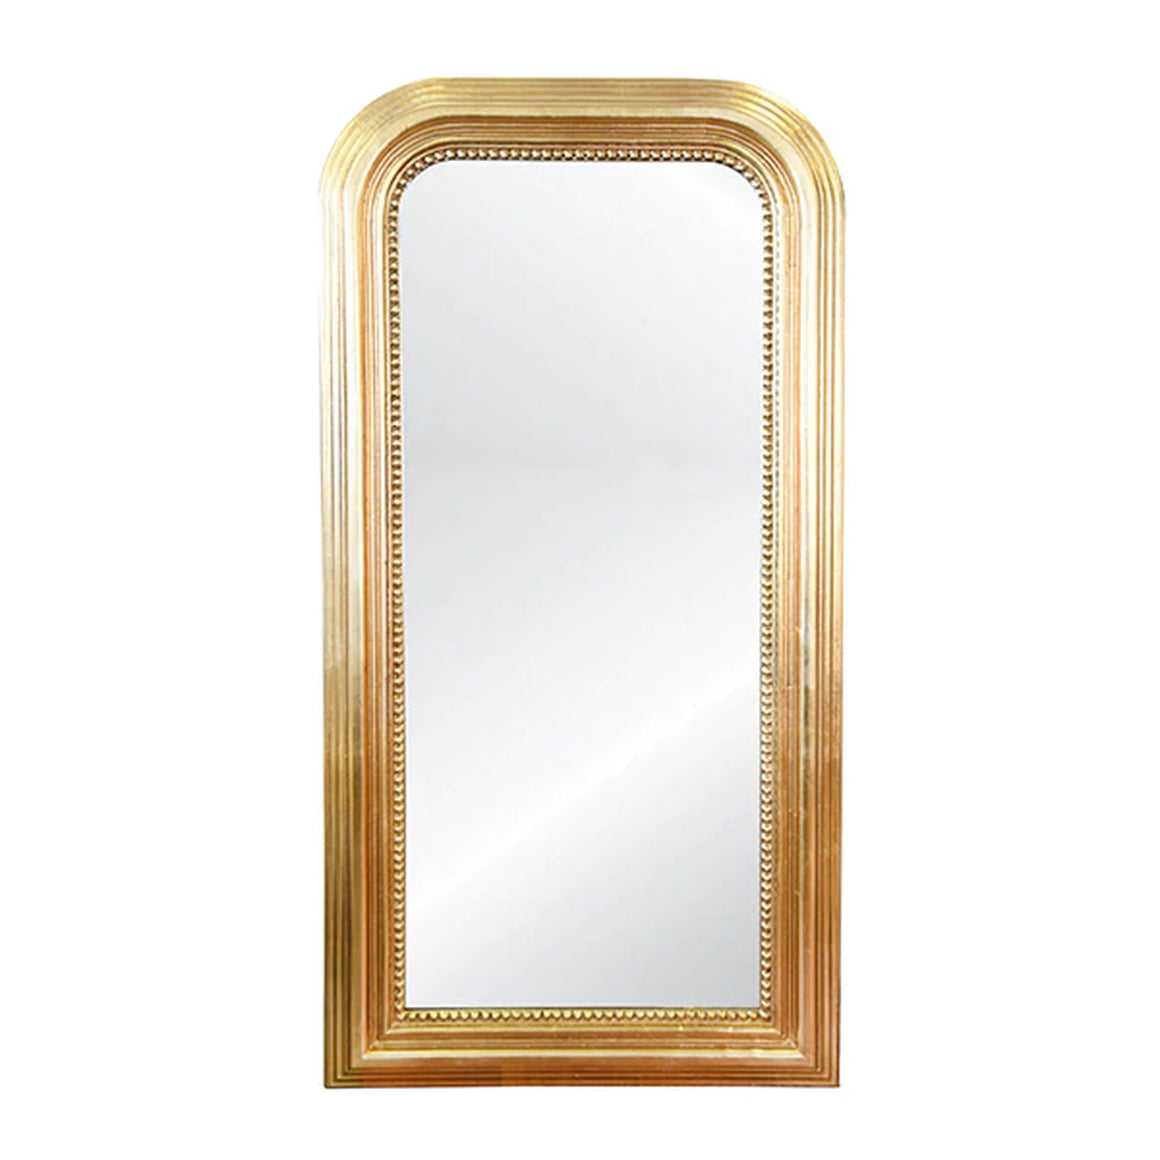 Worlds Away Waverly Tall Curved Edge Mirror - Gold Leaf